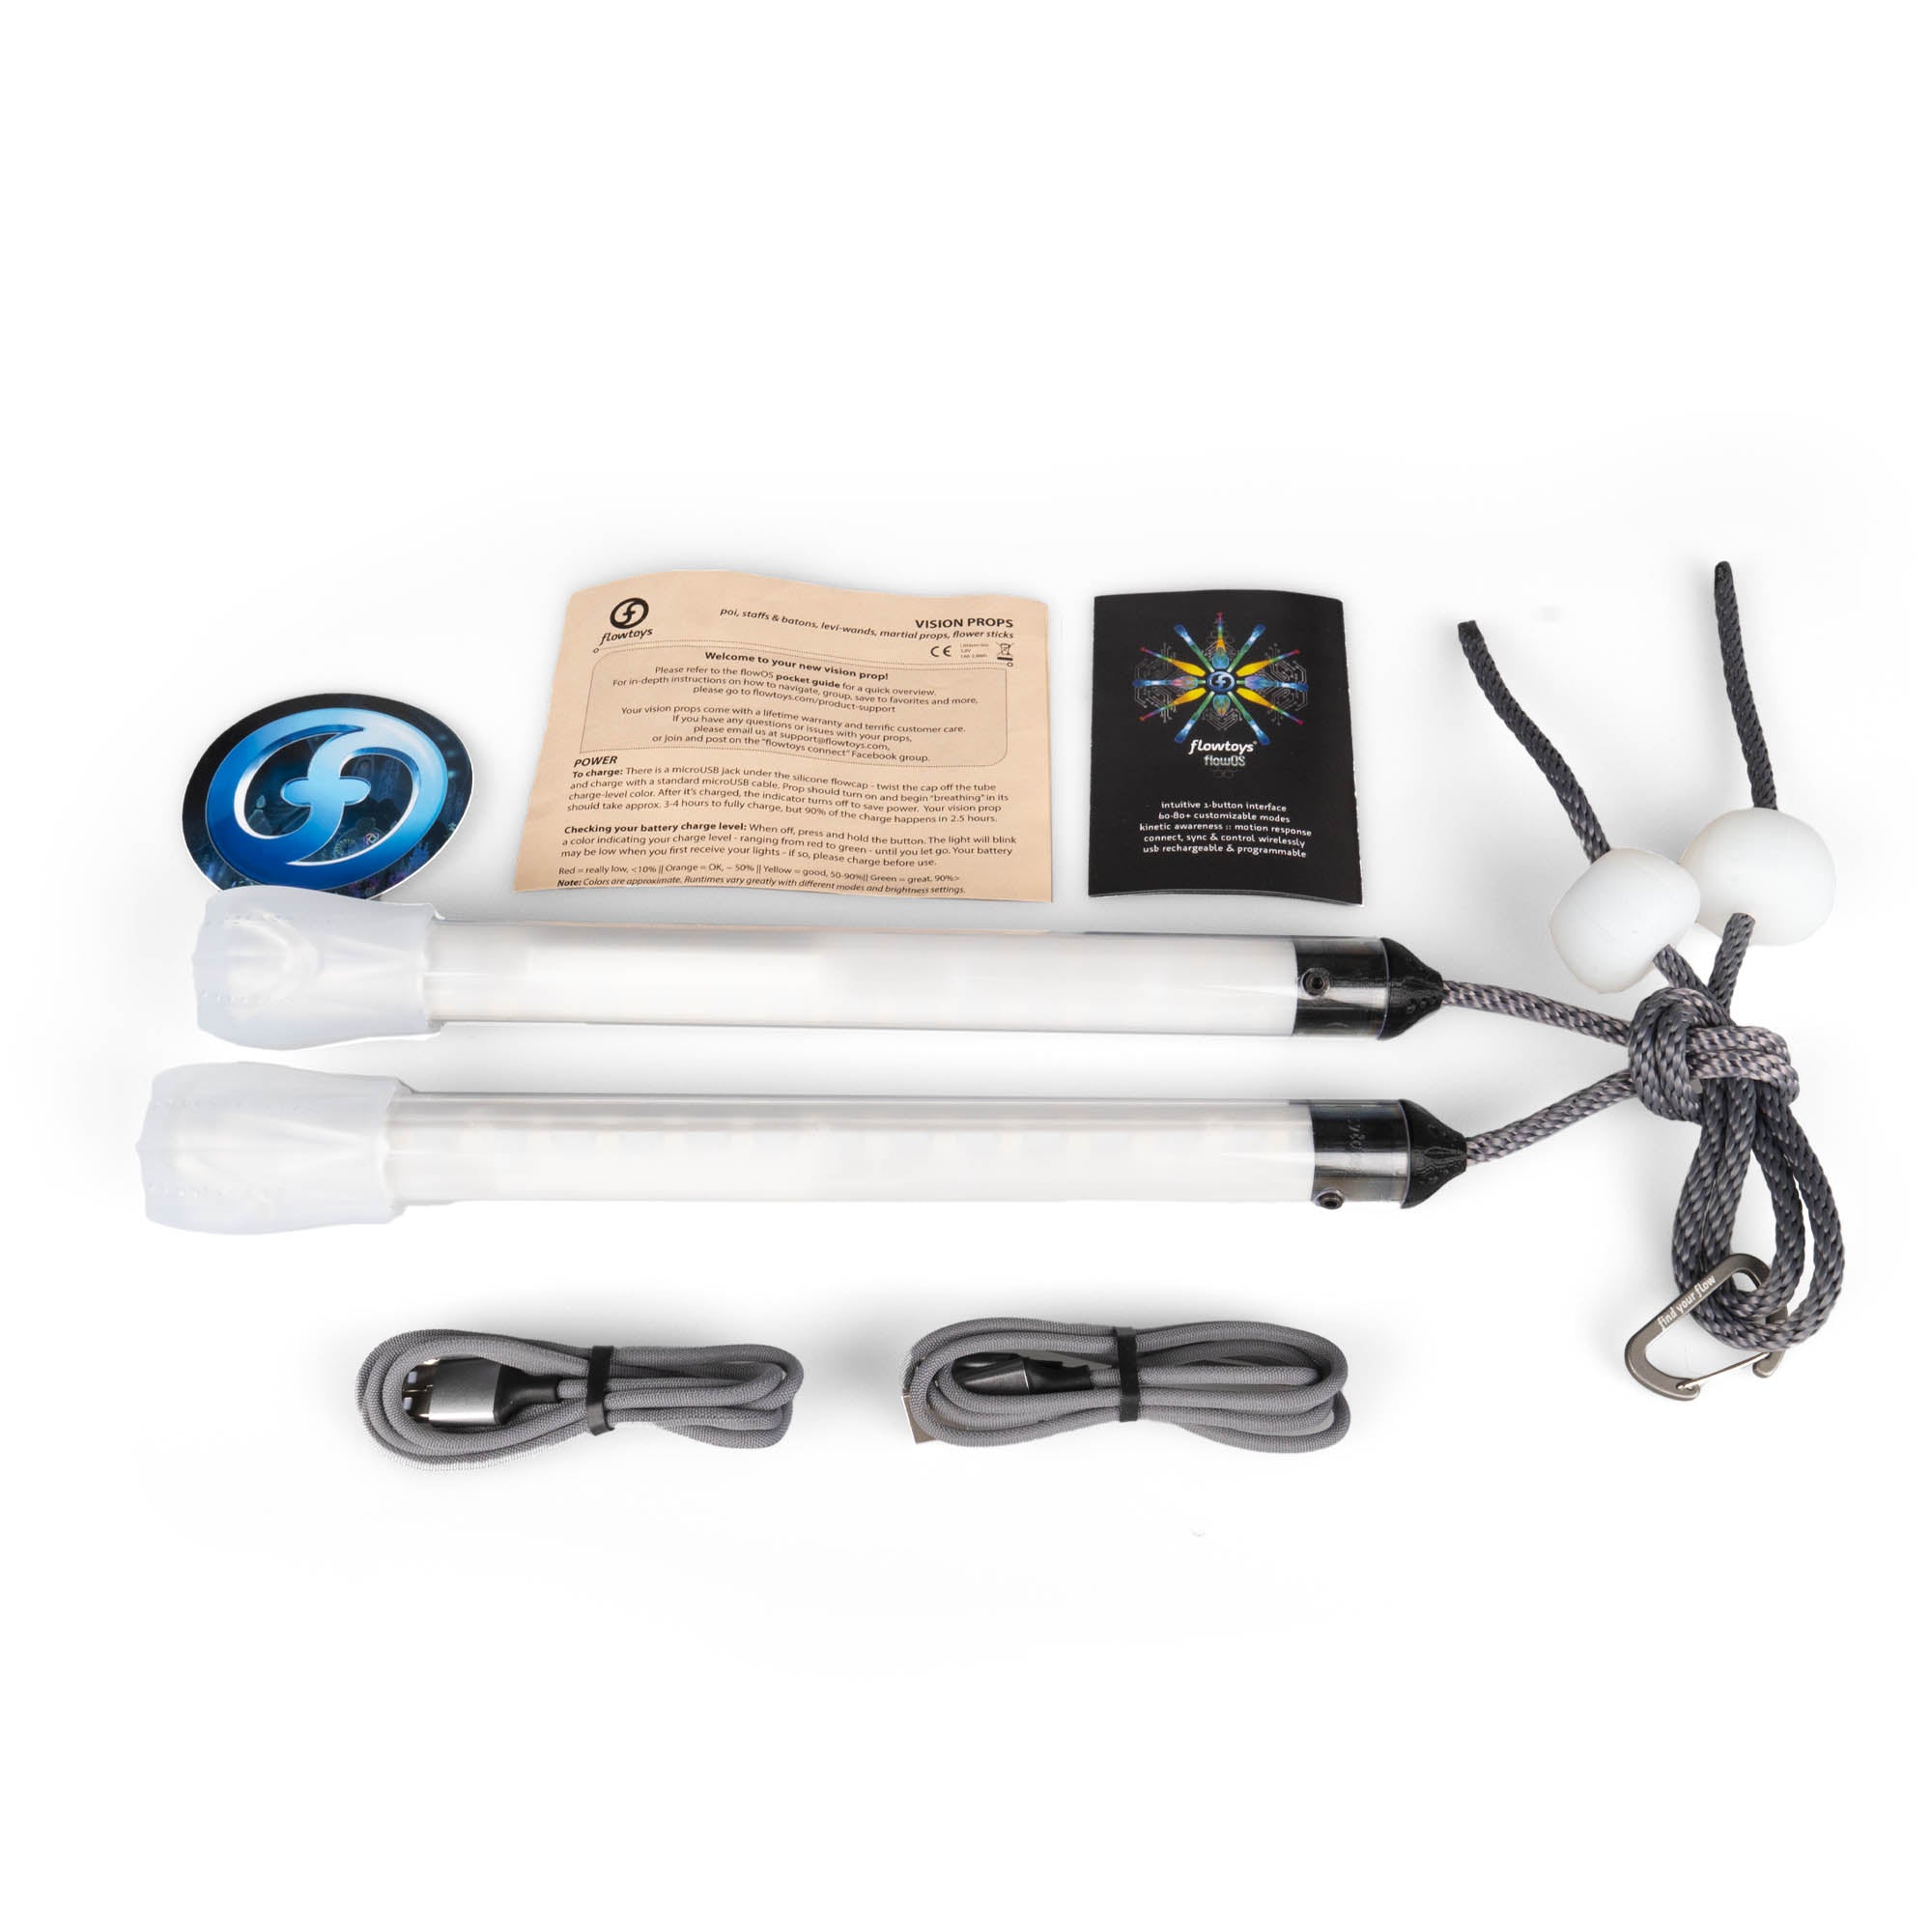 Flowtoys vision poi - everything included with the product